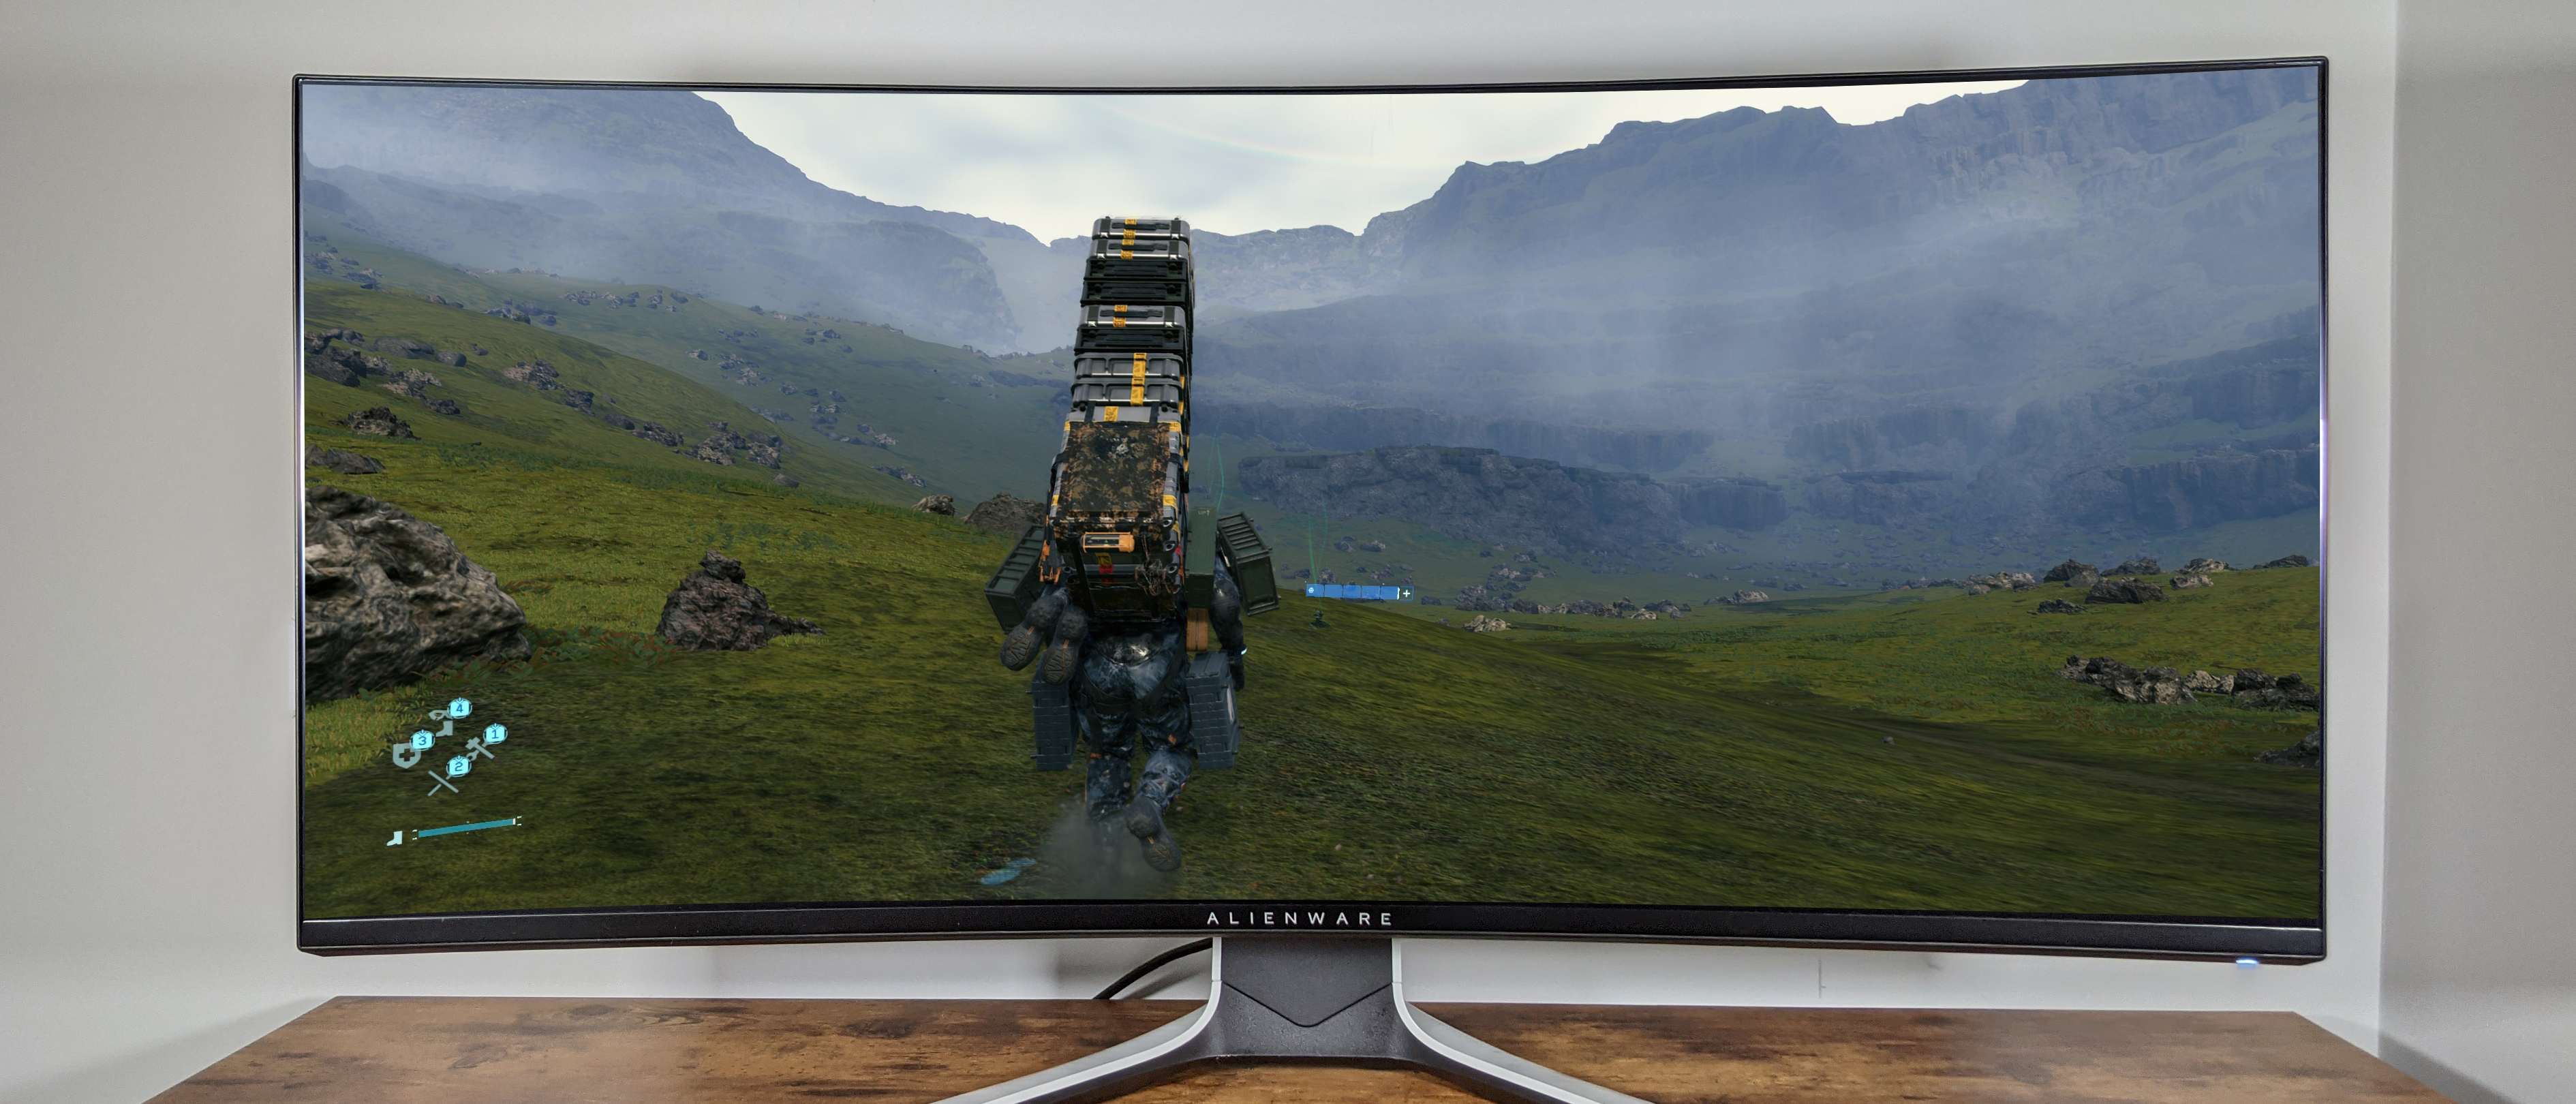 Alienware 38 AW3821DW gaming monitor review | Laptop Mag